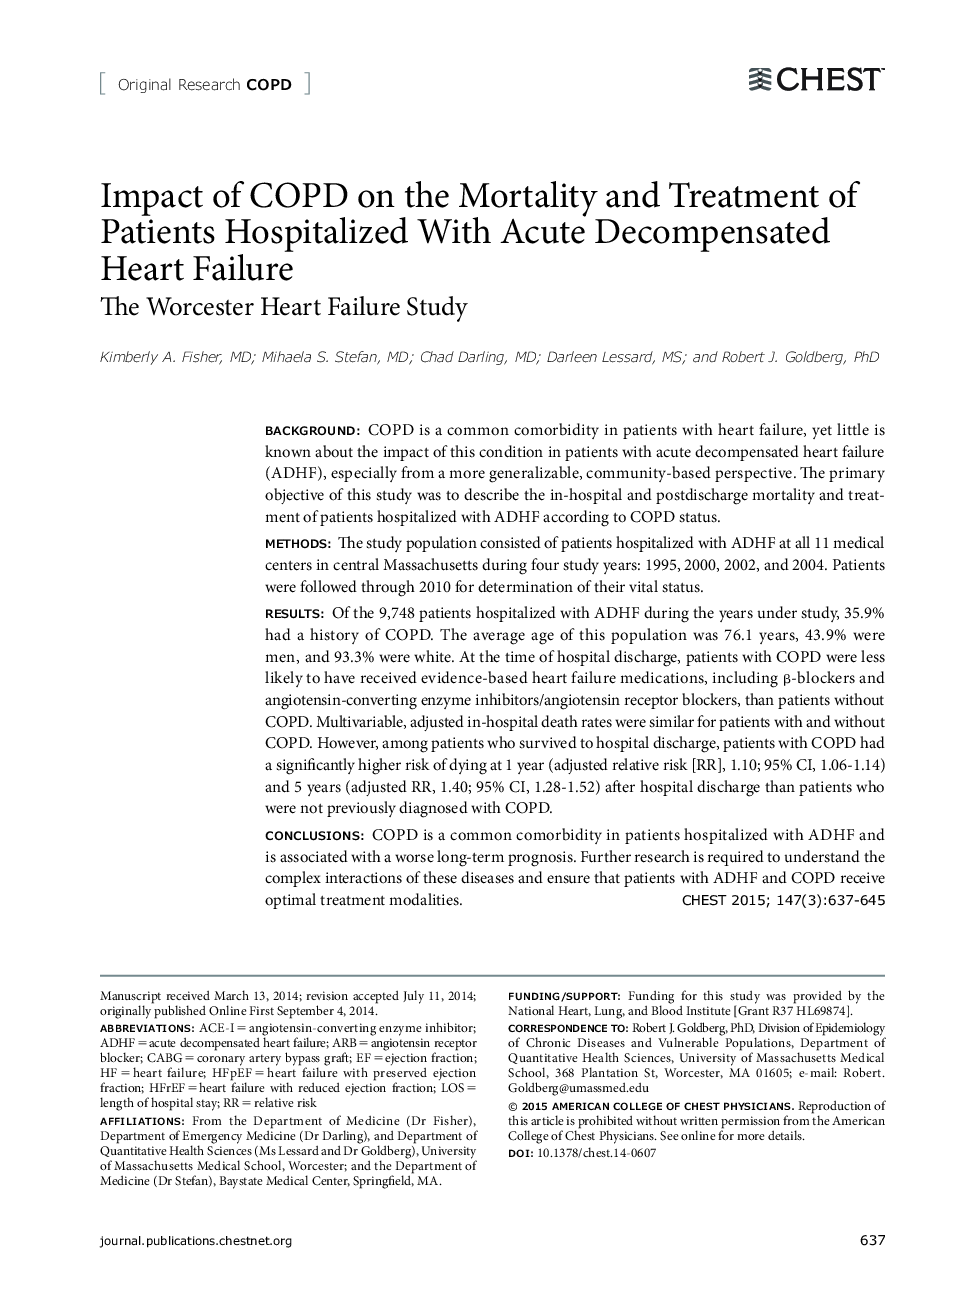 Impact of COPD on the Mortality and Treatment of Patients Hospitalized With Acute Decompensated Heart Failure : The Worcester Heart Failure Study